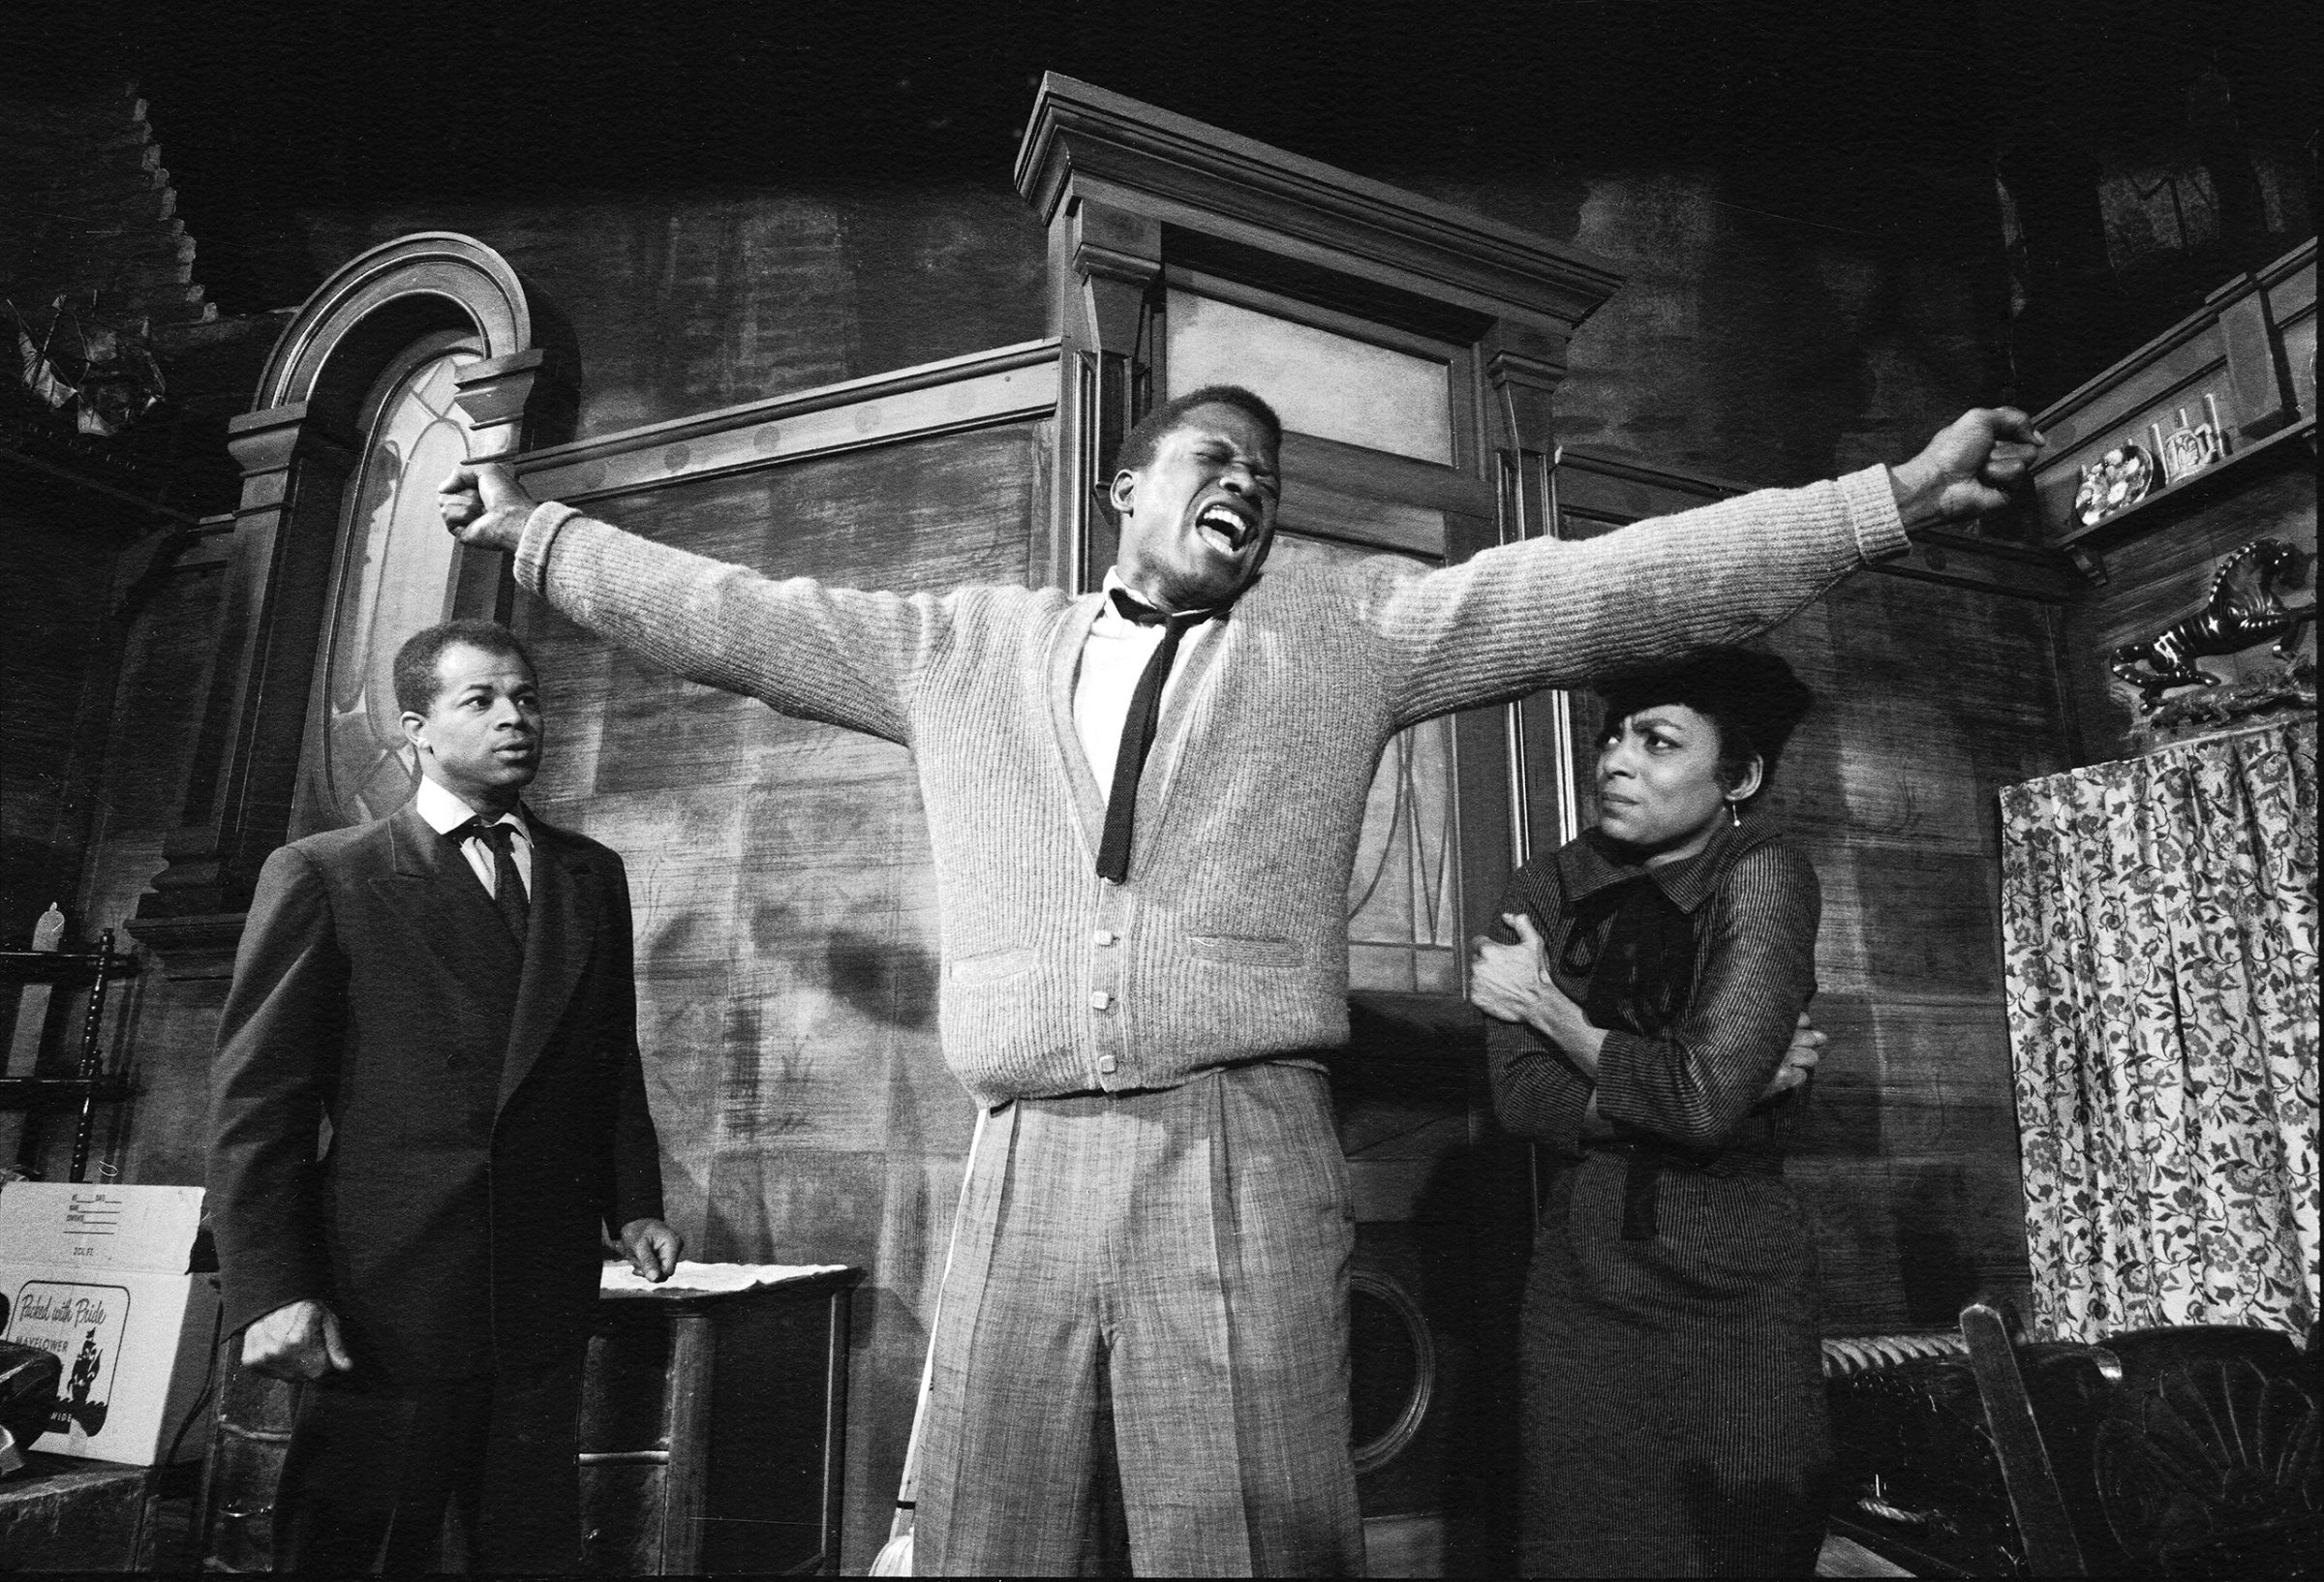 Sidney Poitier in a dramatic scene from play "A Raisin in the Sun", with Ruby Dee, 1959.